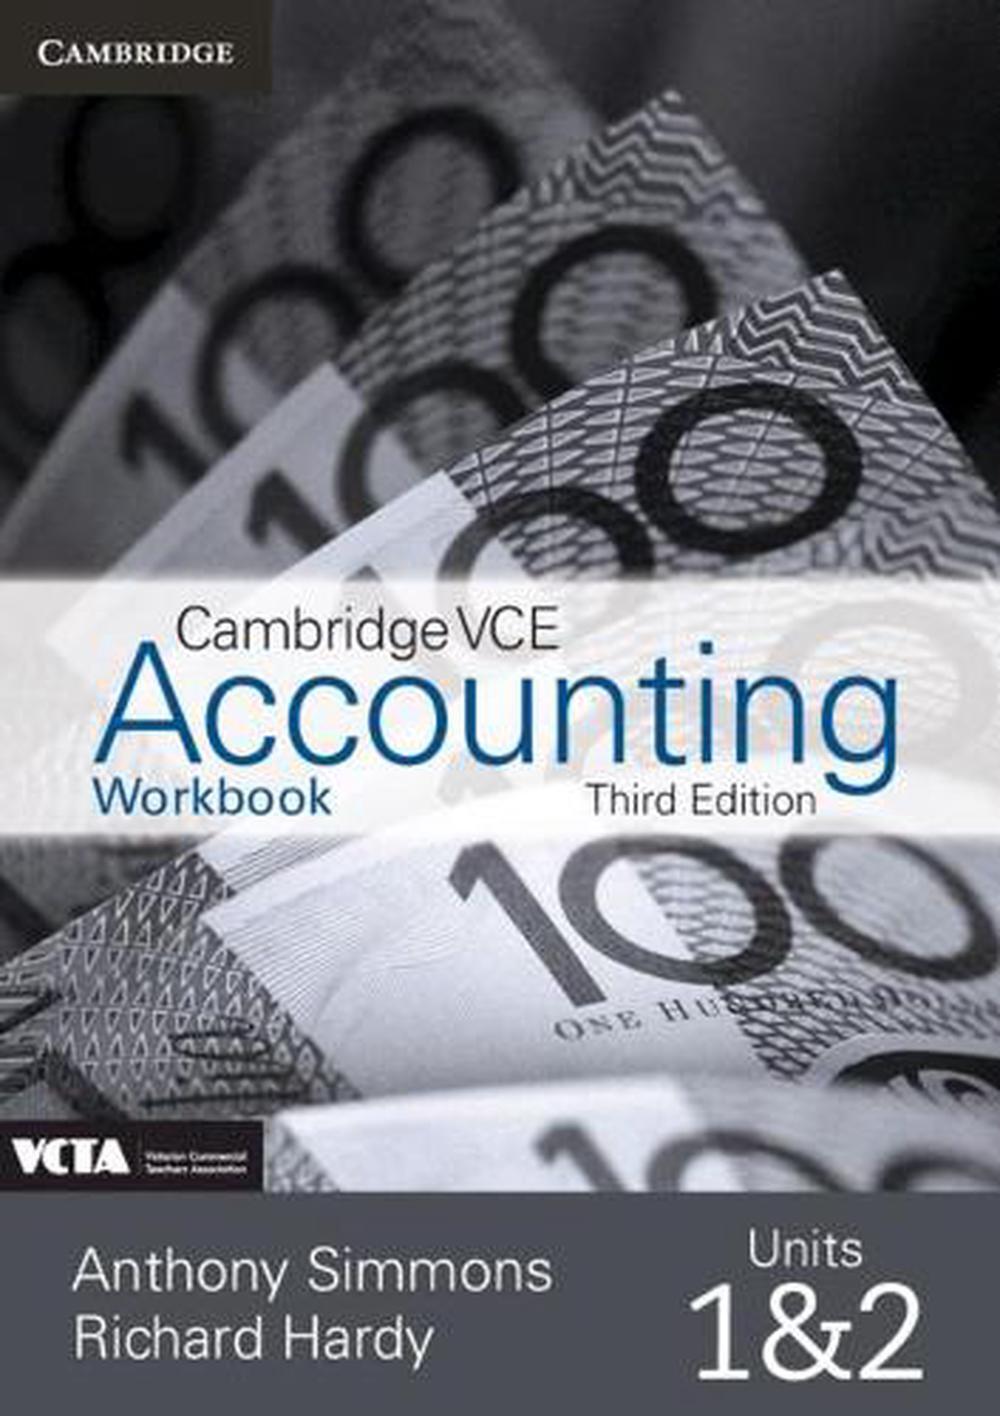 cambridge vce accounting units 1 and 2 workbook 3rd edition richard hardy, anthony simmons 1108469841,